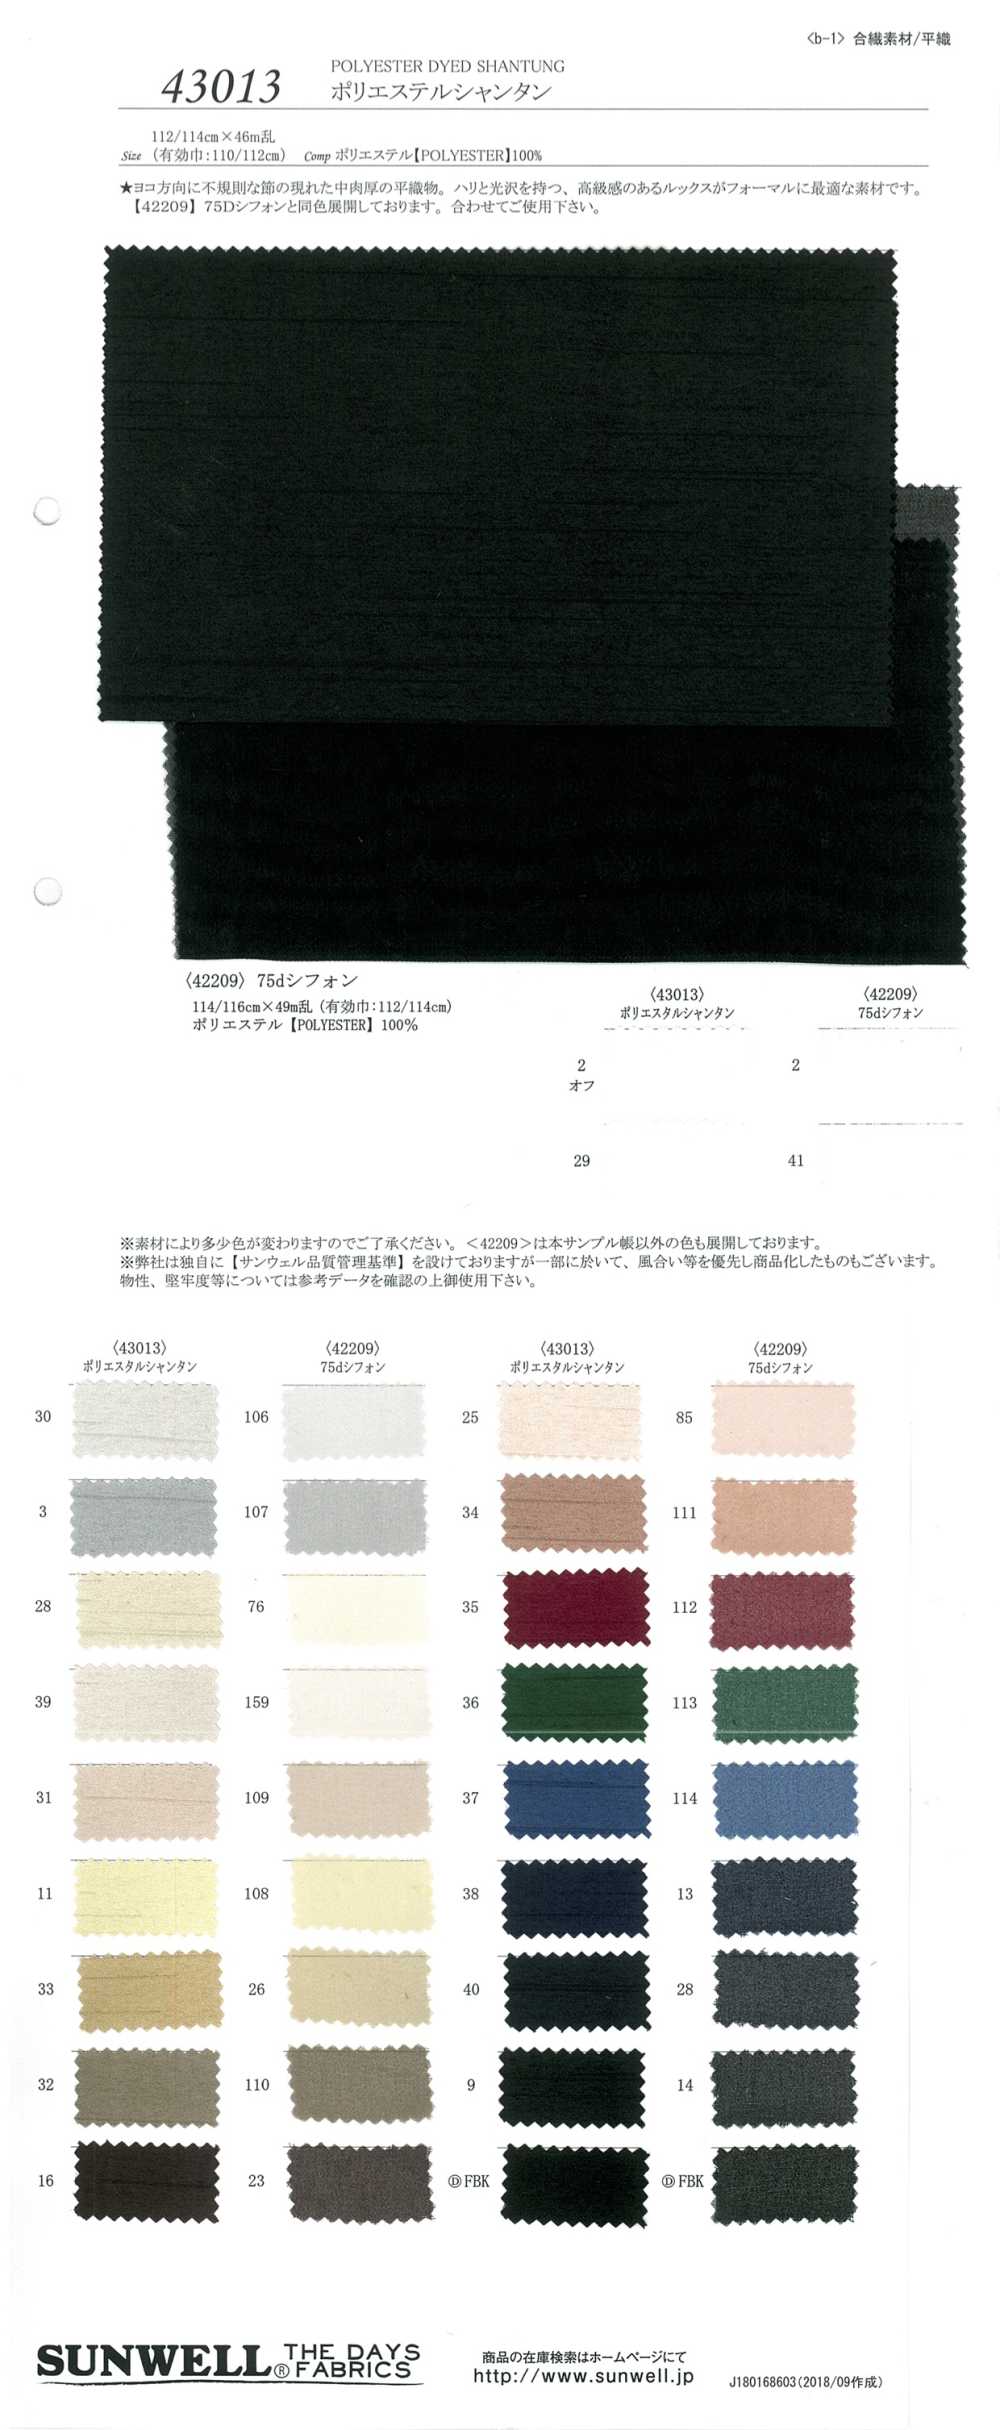 43013 Polyester Shantung[Textile / Fabric] SUNWELL